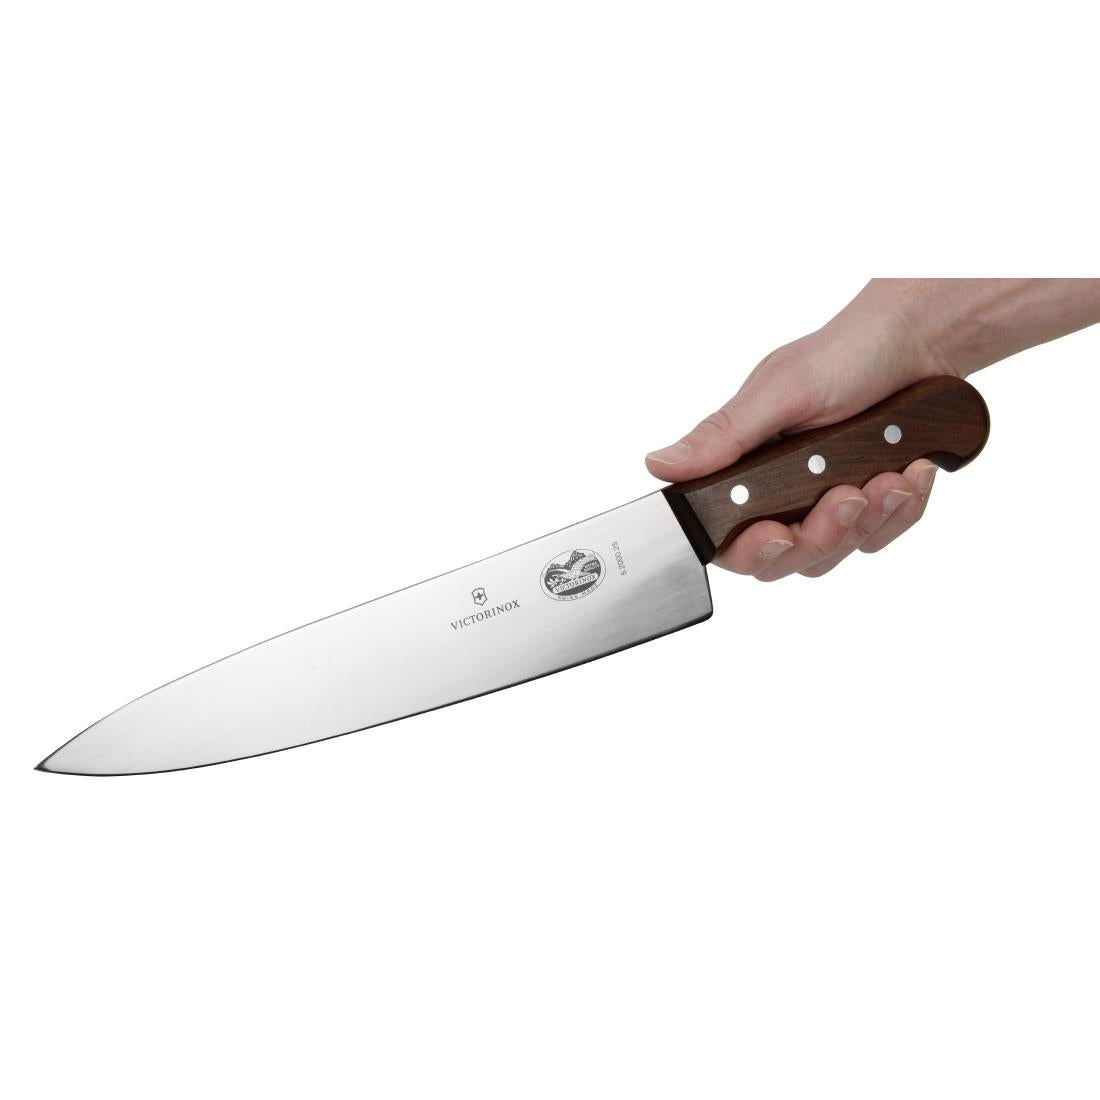 C606 Victorinox Wooden Handled Carving Knife 25cm